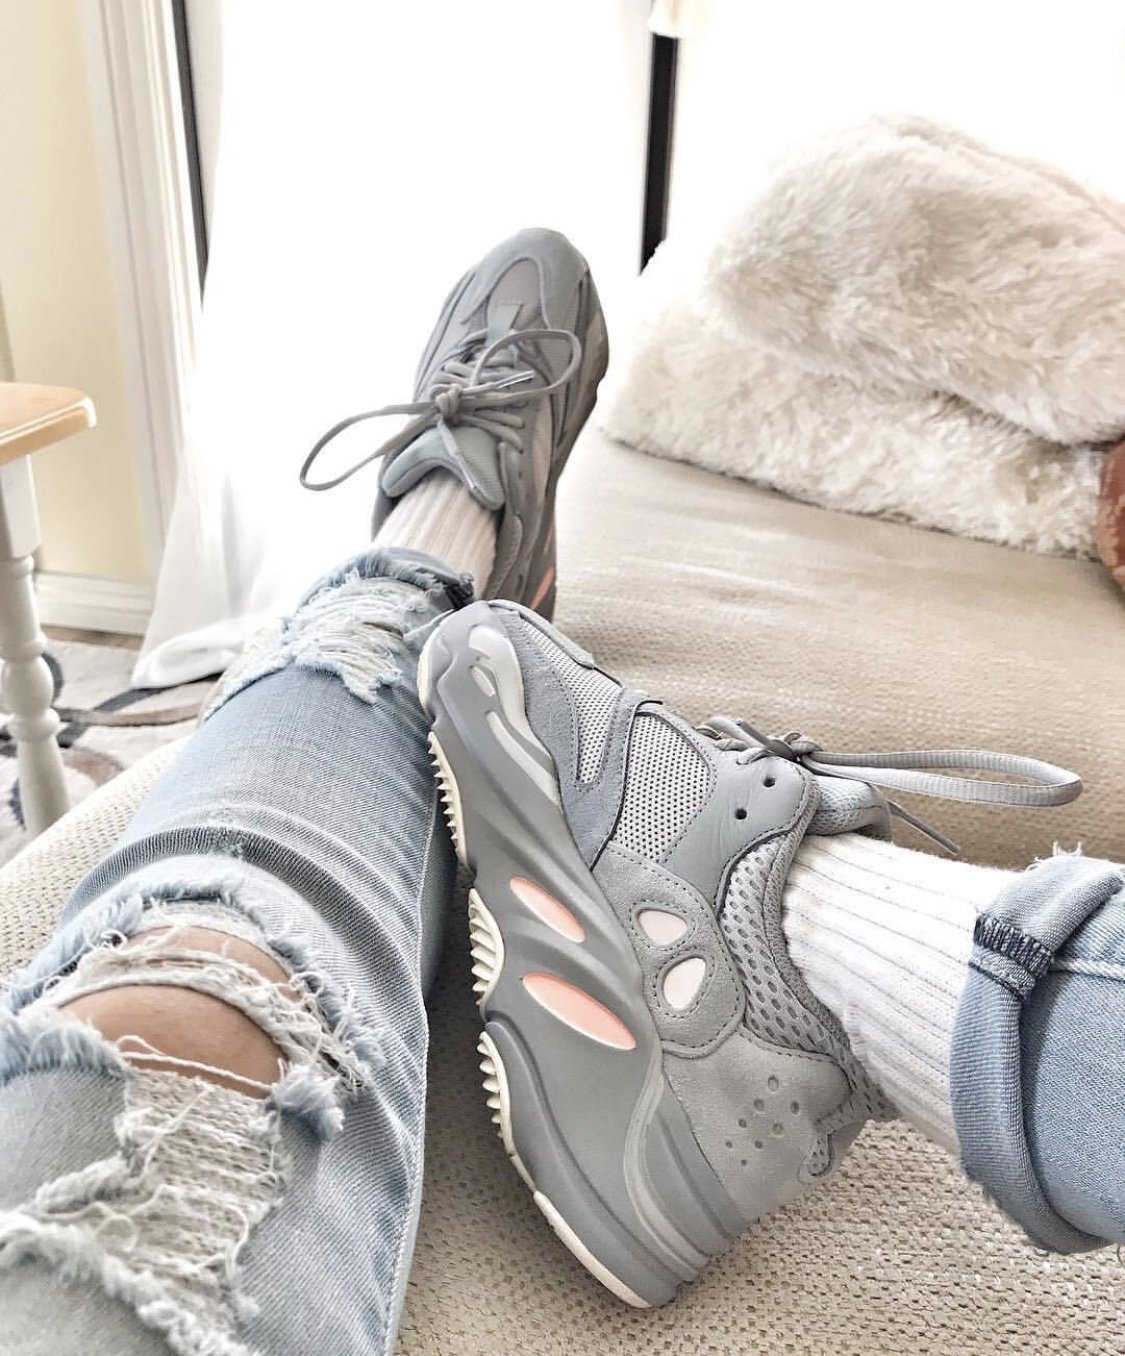 yeezy 700 couleur